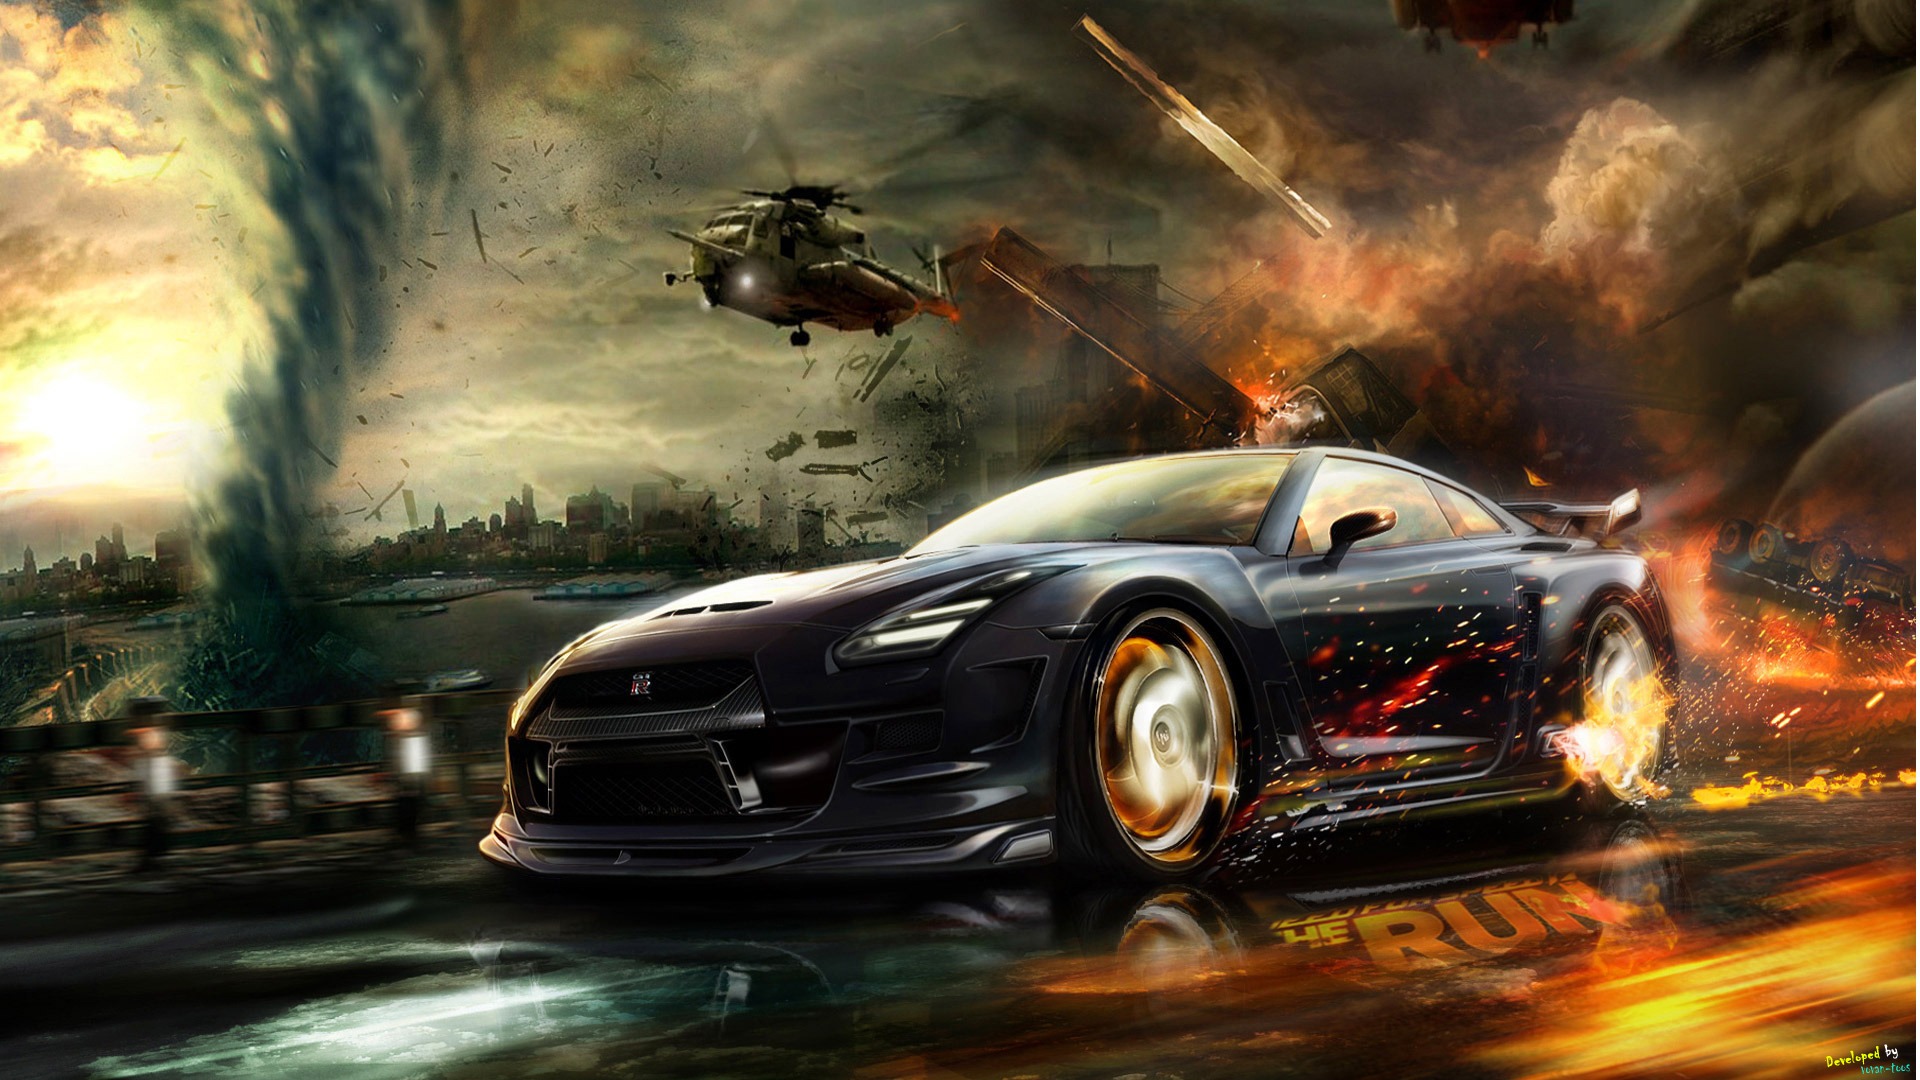 Need for Speed: The Run HD wallpapers #2 - 1920x1080